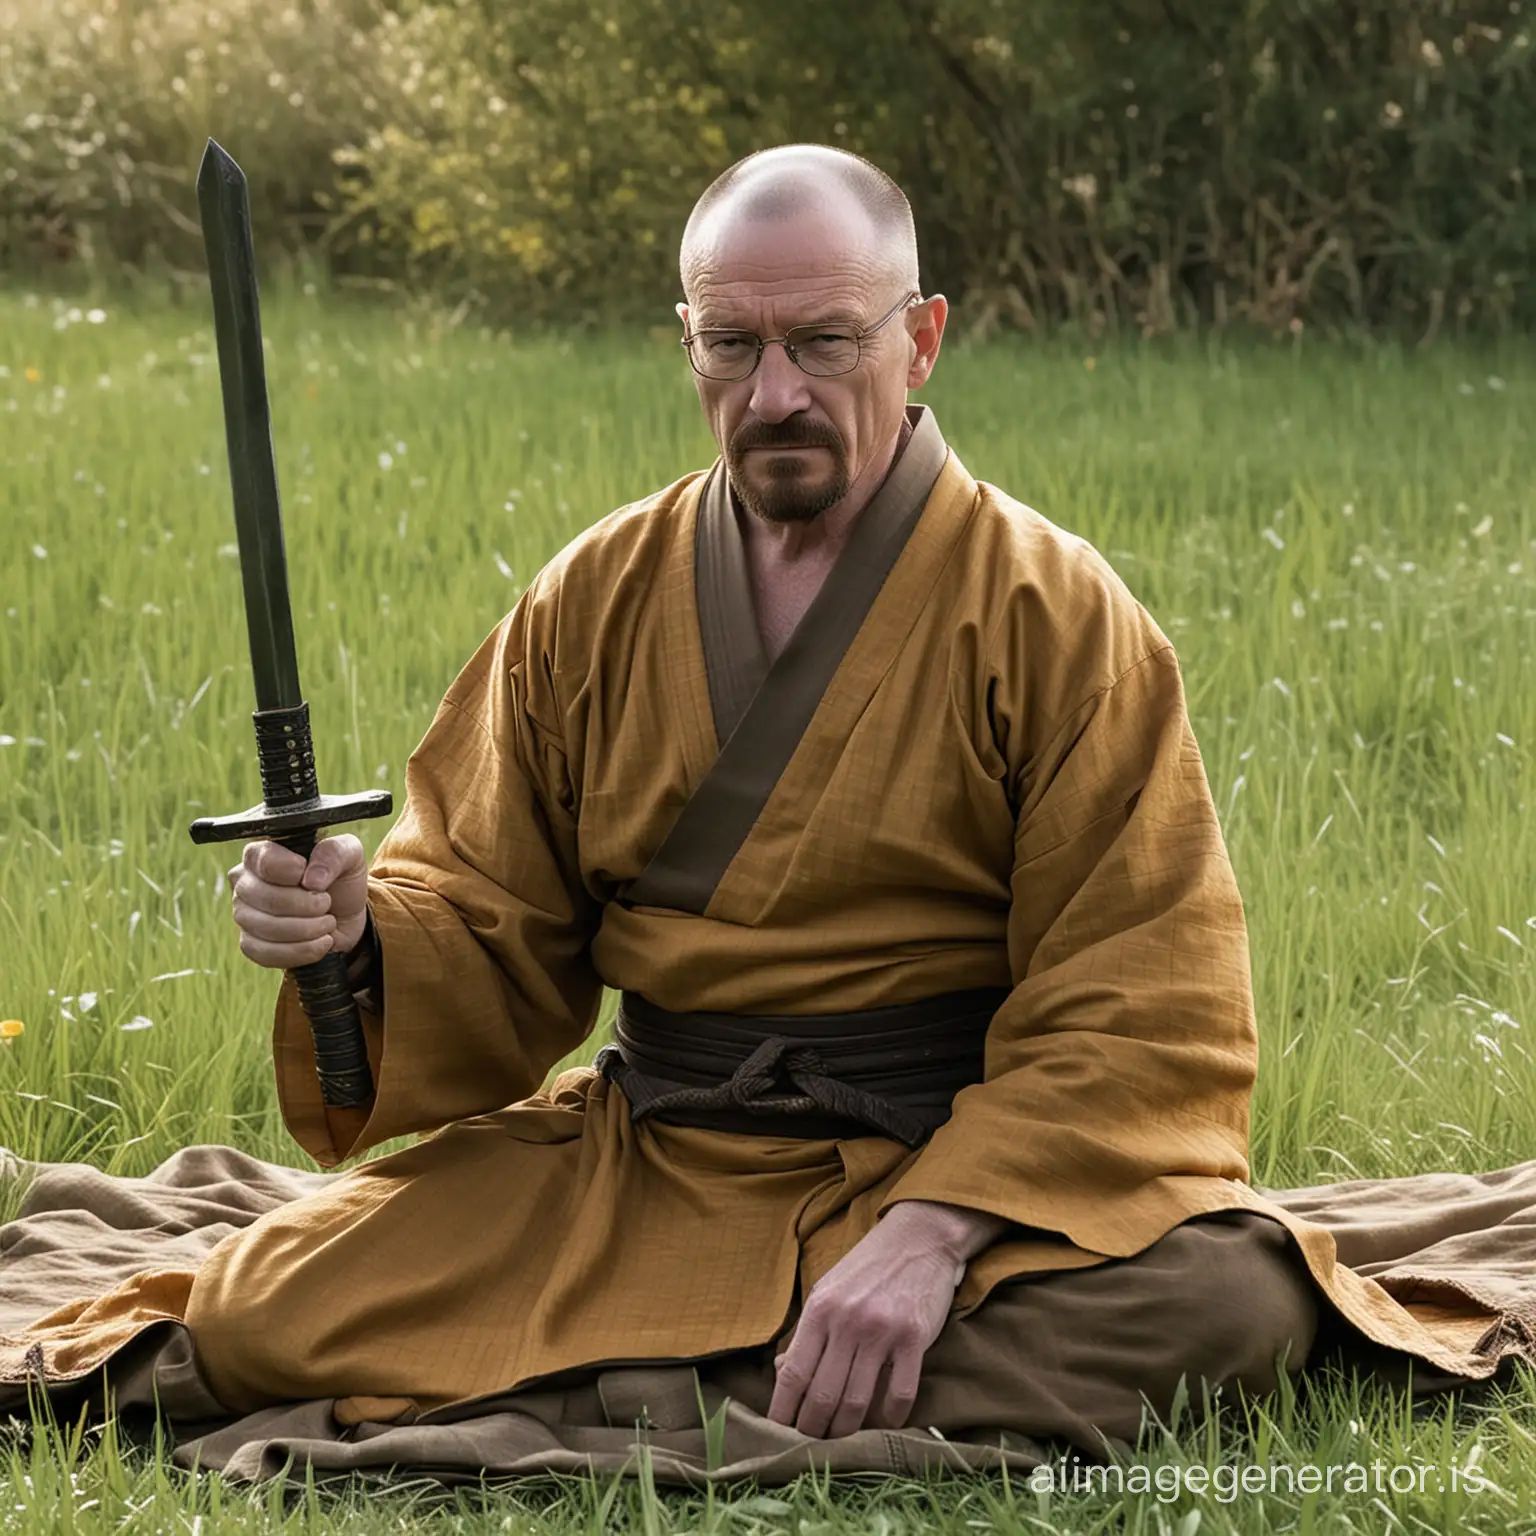 Walter White in samurai Robe with bun hair meditating in the grass holding sword in hands